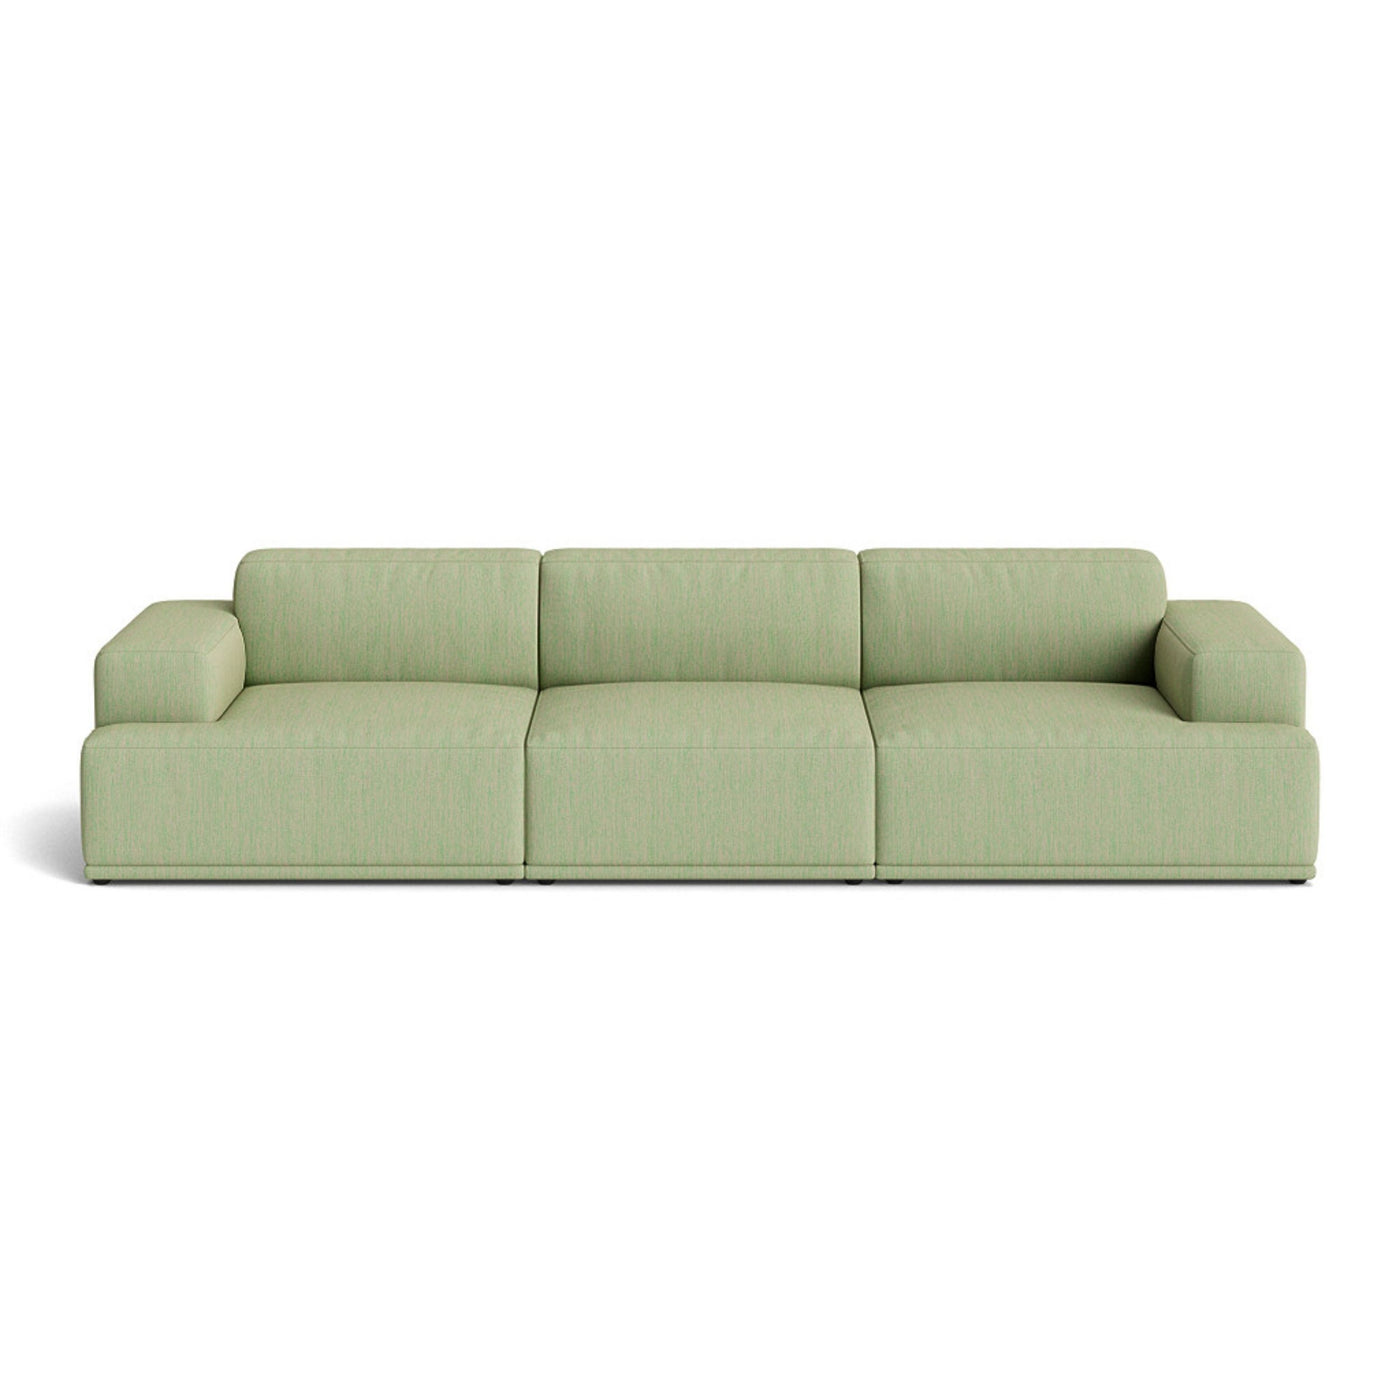 Muuto Connect Soft Modular 3 Seater Sofa, configuration 1. Made-to-order from someday designs. #colour_balder-942